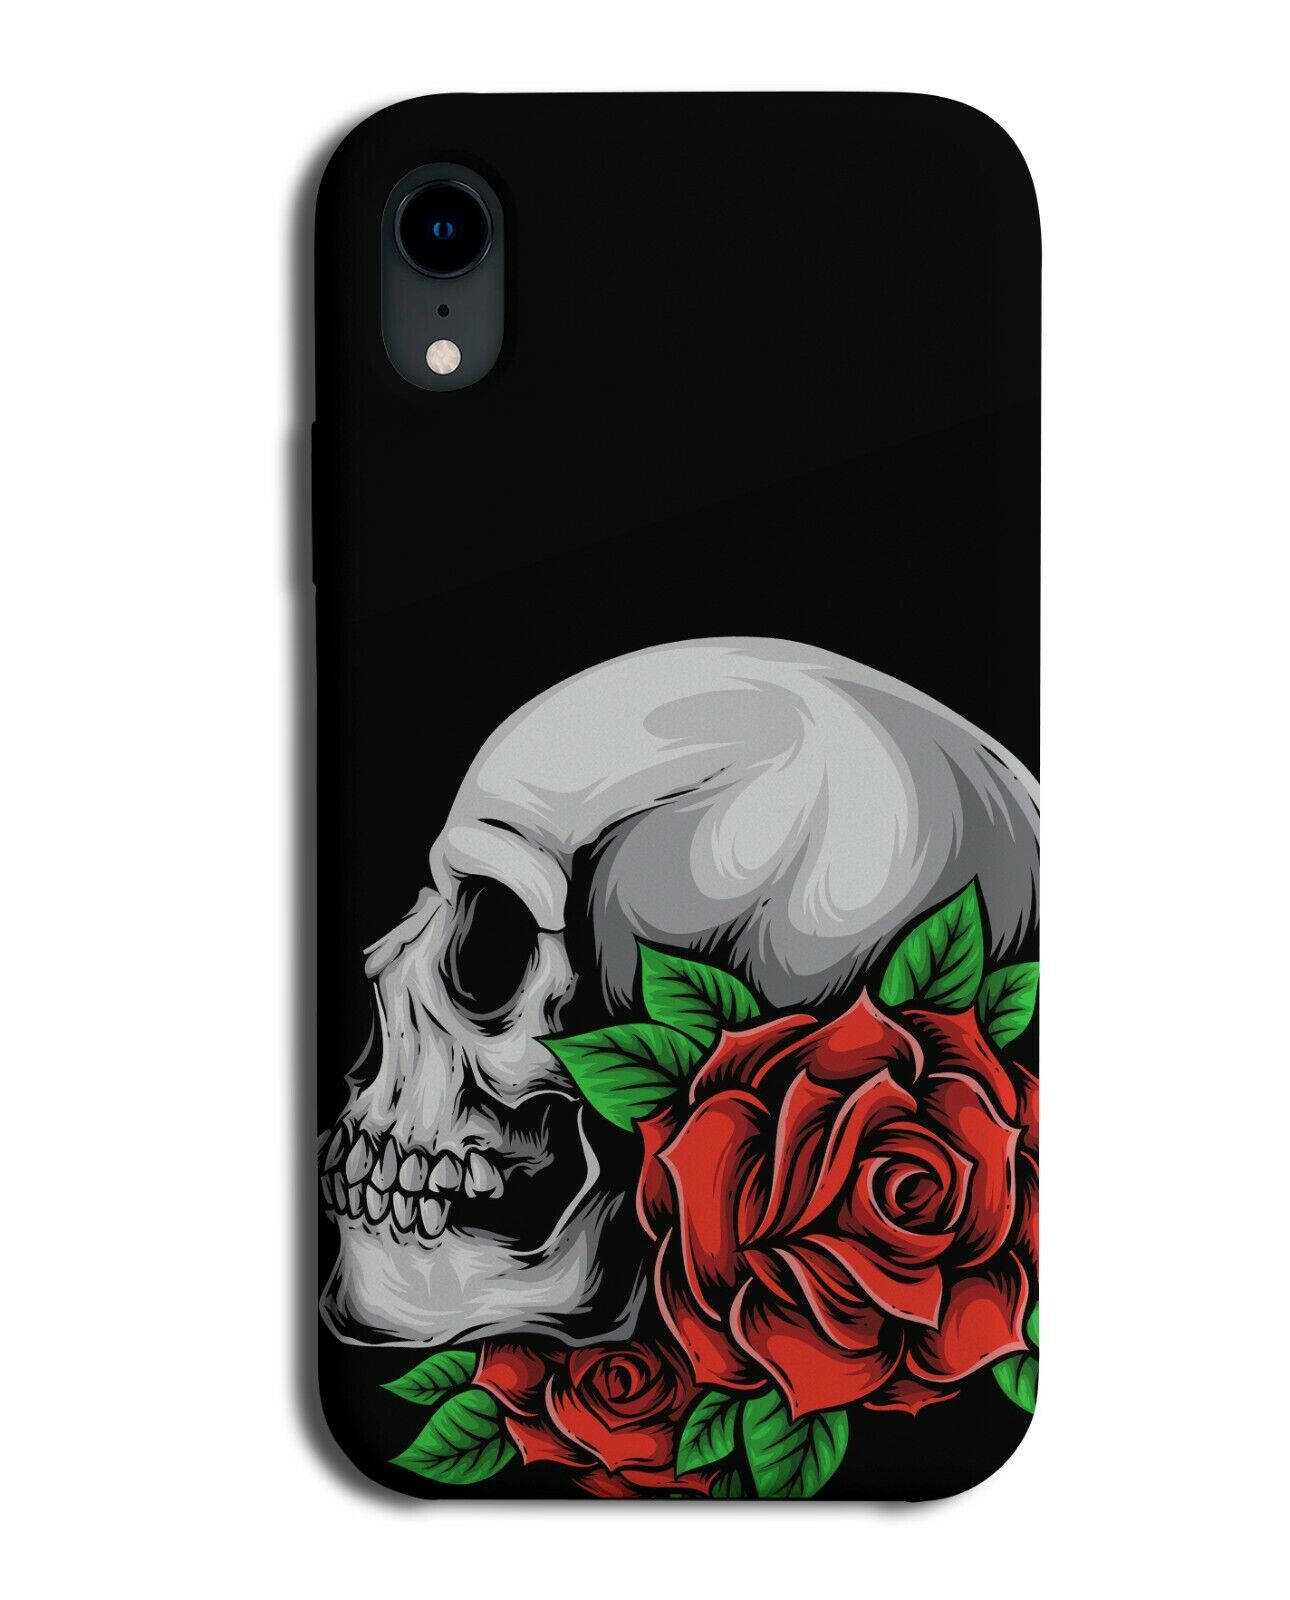 A Black Phone Case With A Skull And Roses Wallpaper